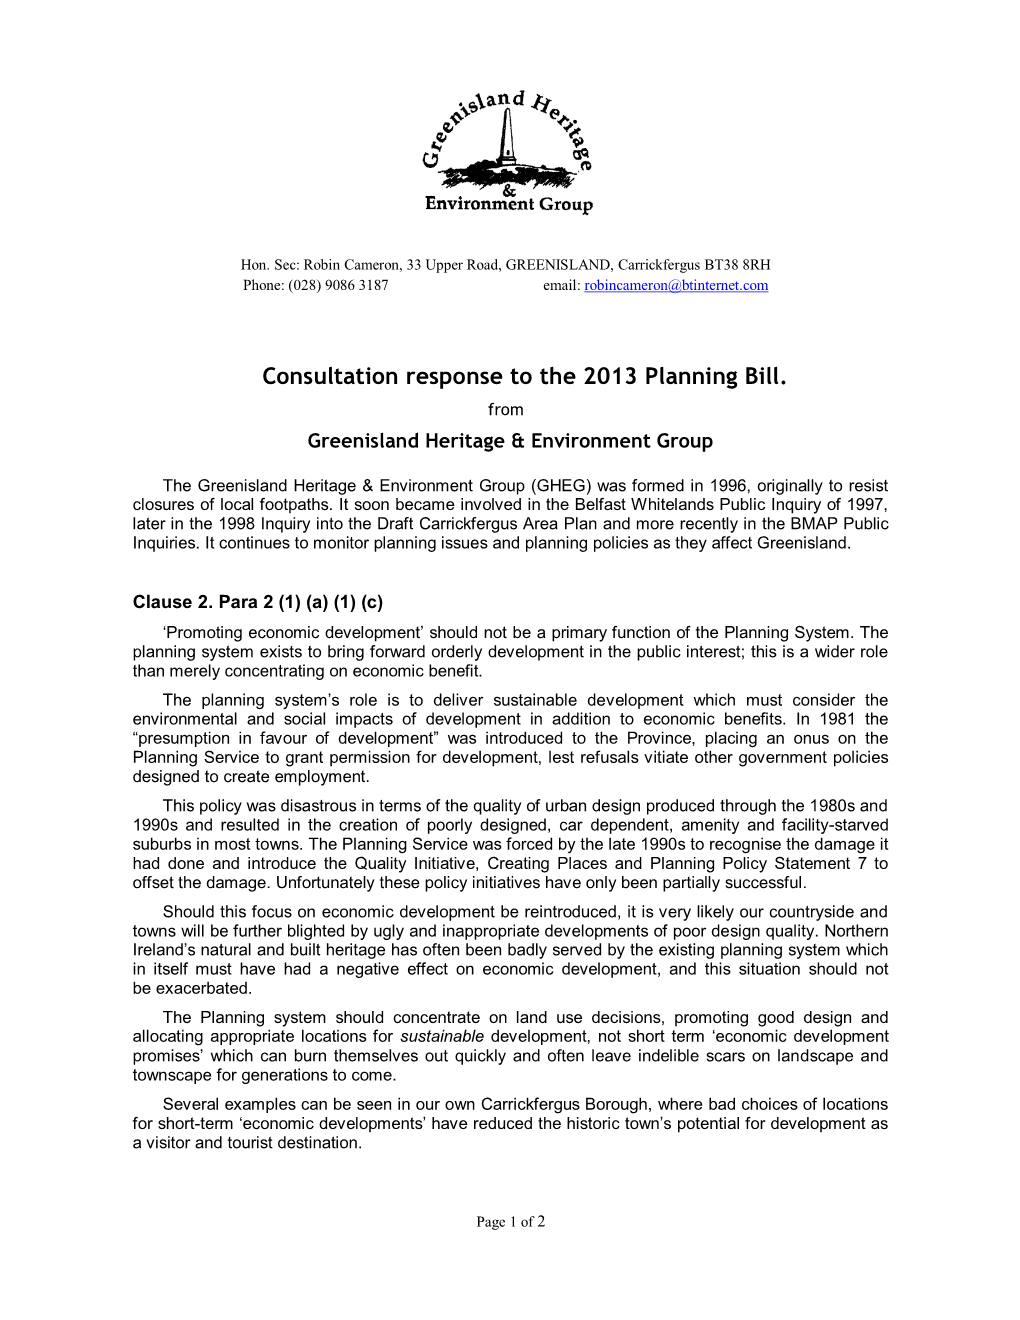 Consultation Response to the 2013 Planning Bill. from Greenisland Heritage & Environment Group